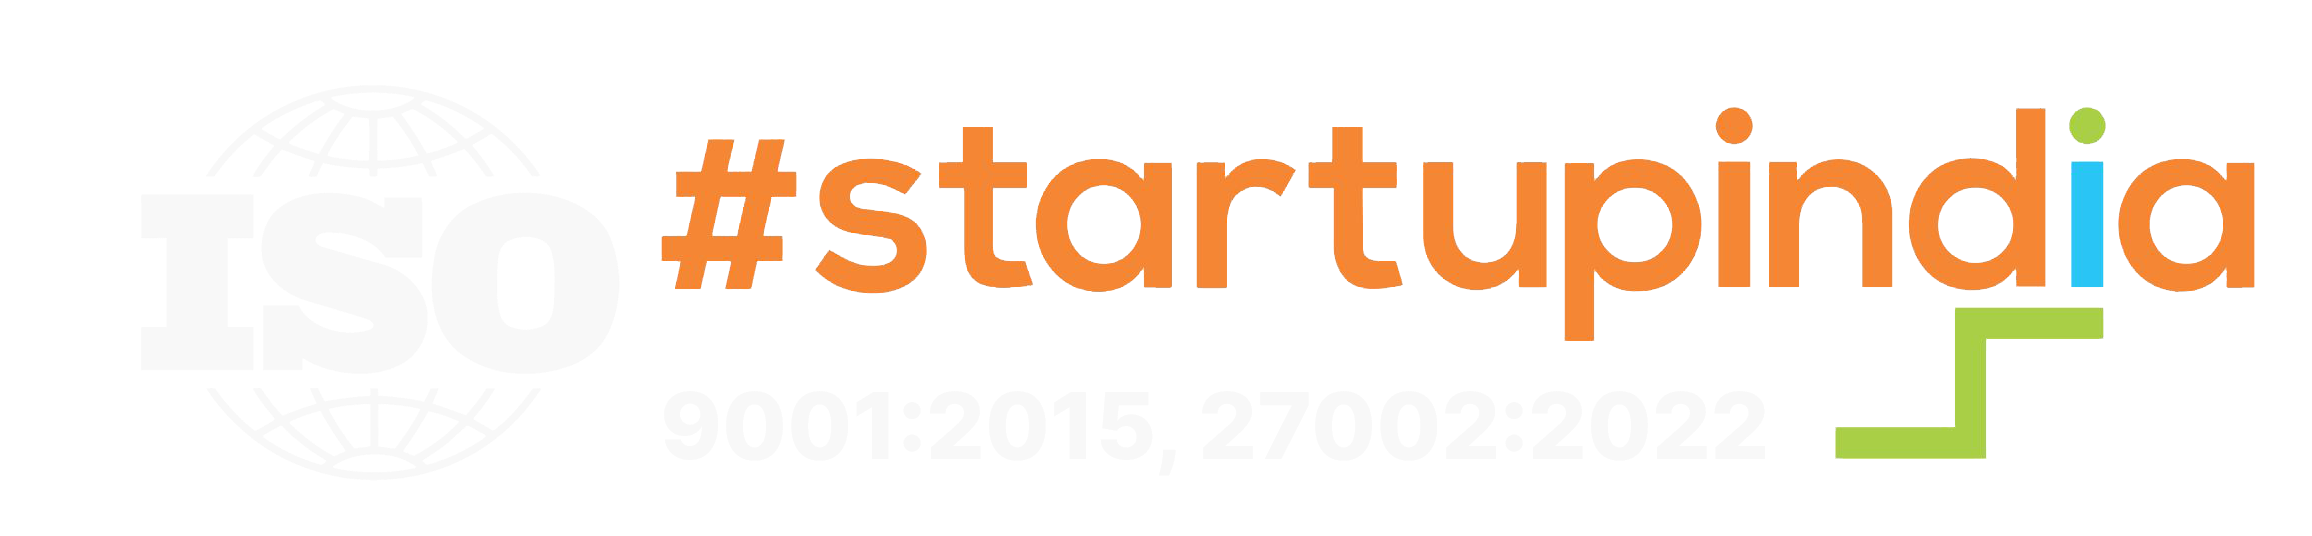 Startup India Certified